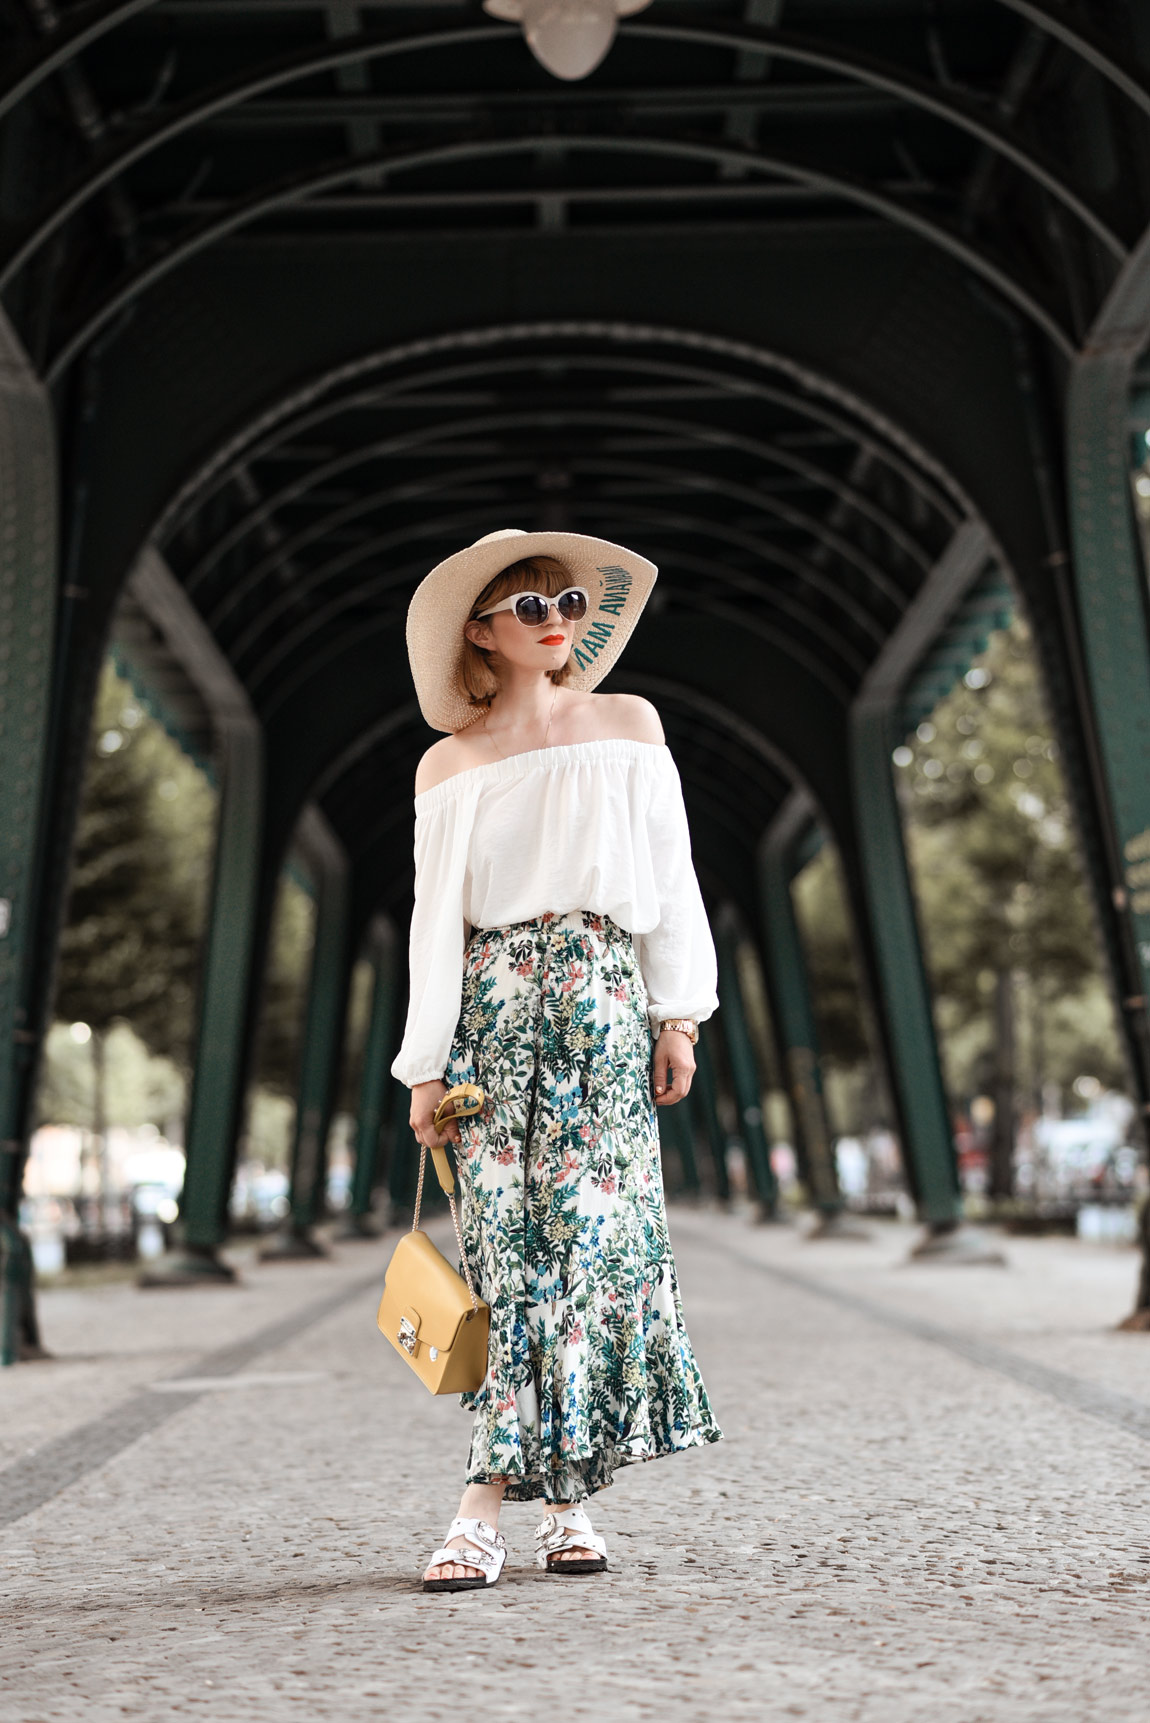 blumen, culotte, offshoulder, outfit, berlin, sommer, culottes, floral, weekday, streetstyle, suess, cute, retro, feminin, fashionblogger, modeblogger